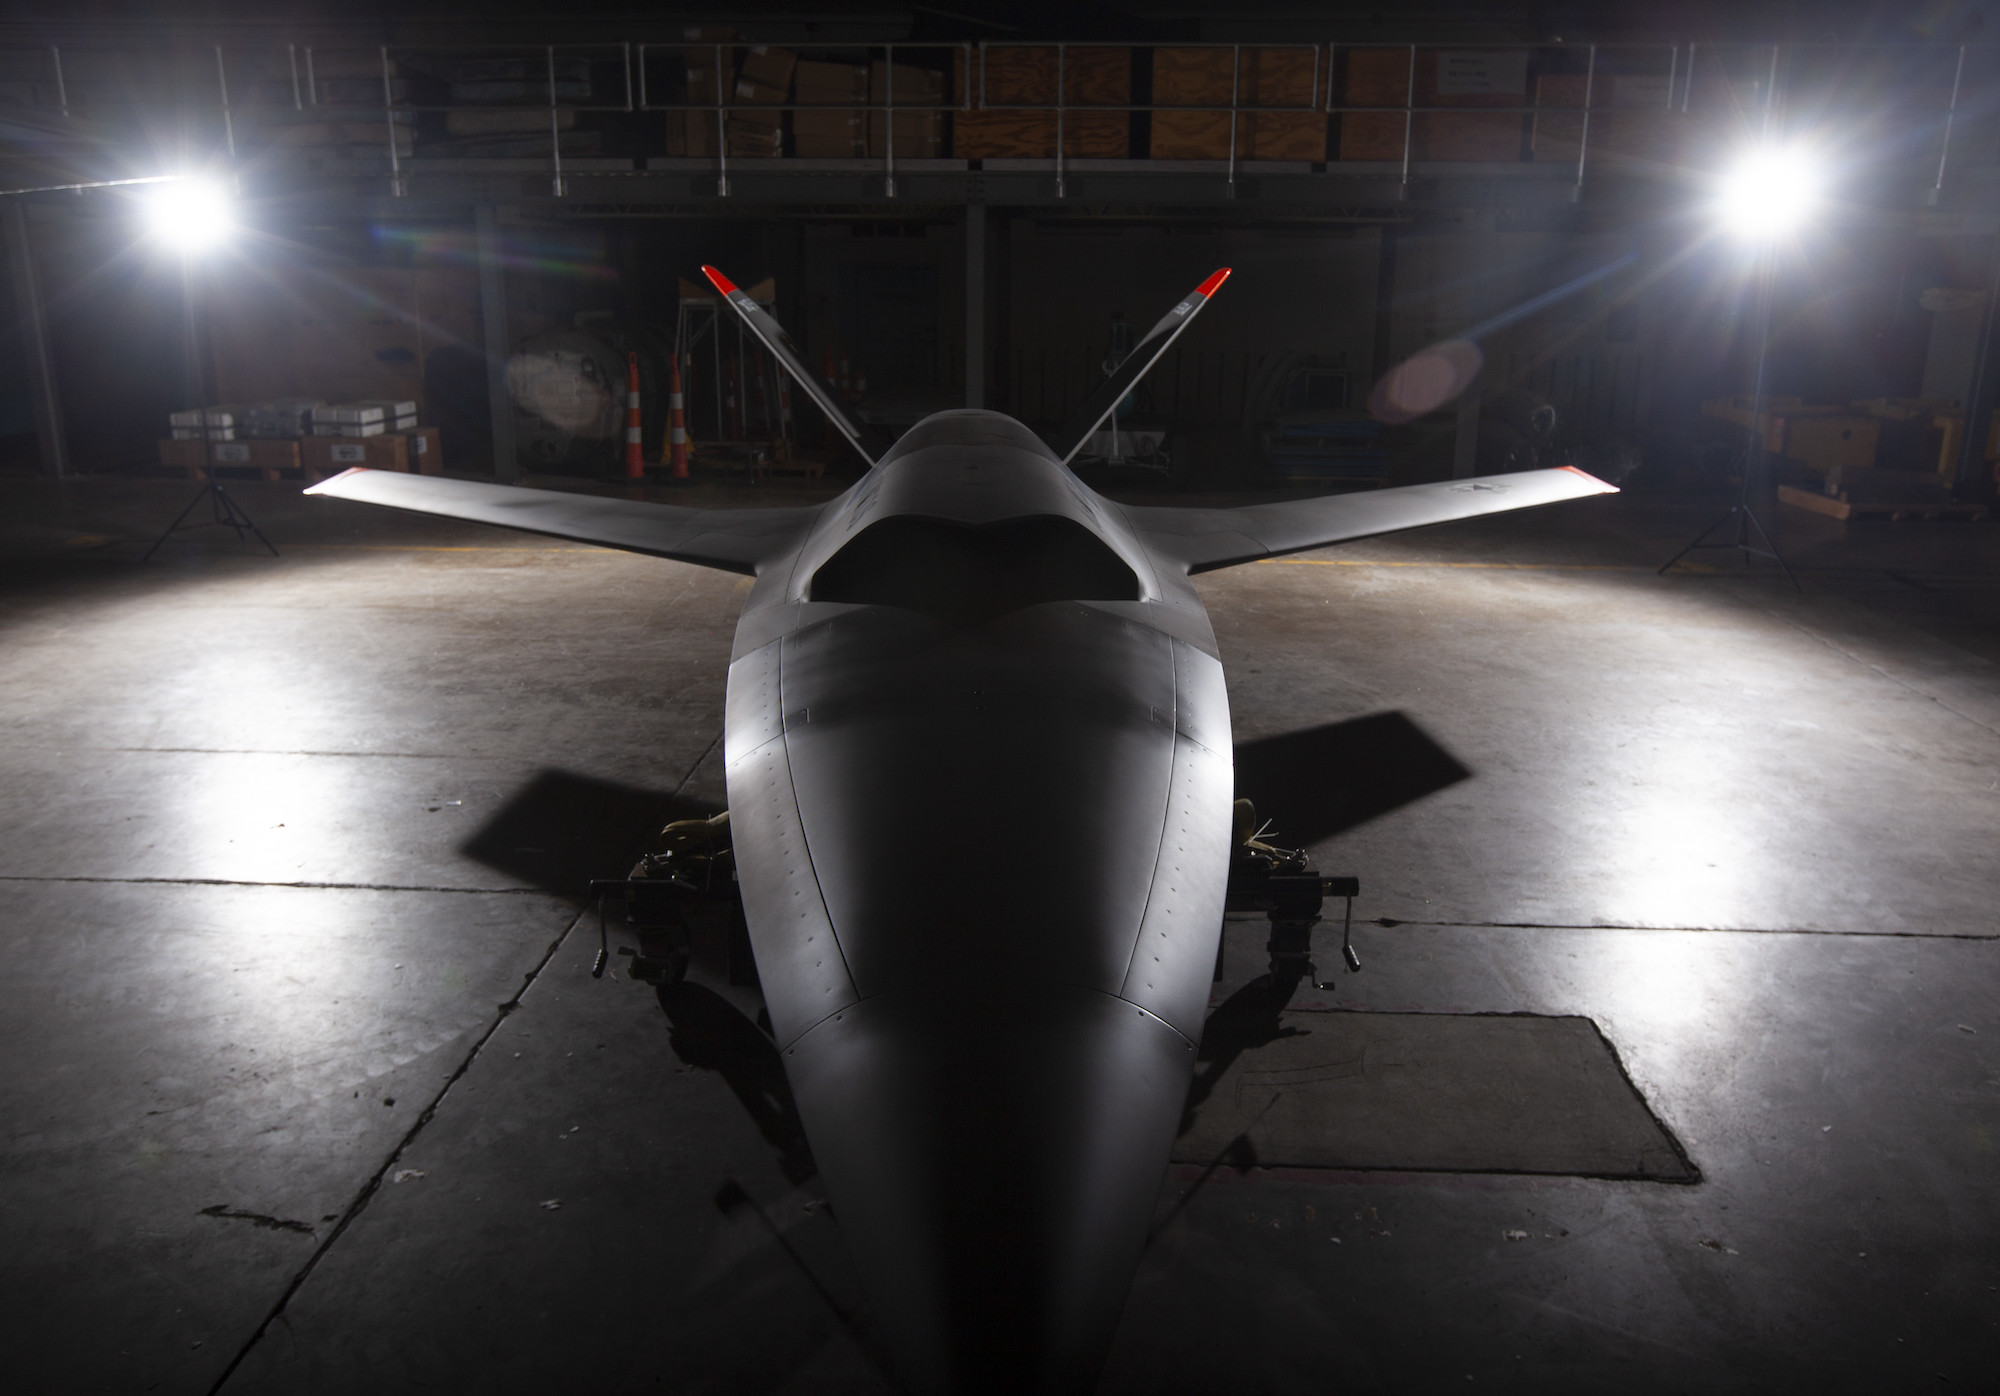 This cutting-edge drone is headed out to pasture at an Air Force museum